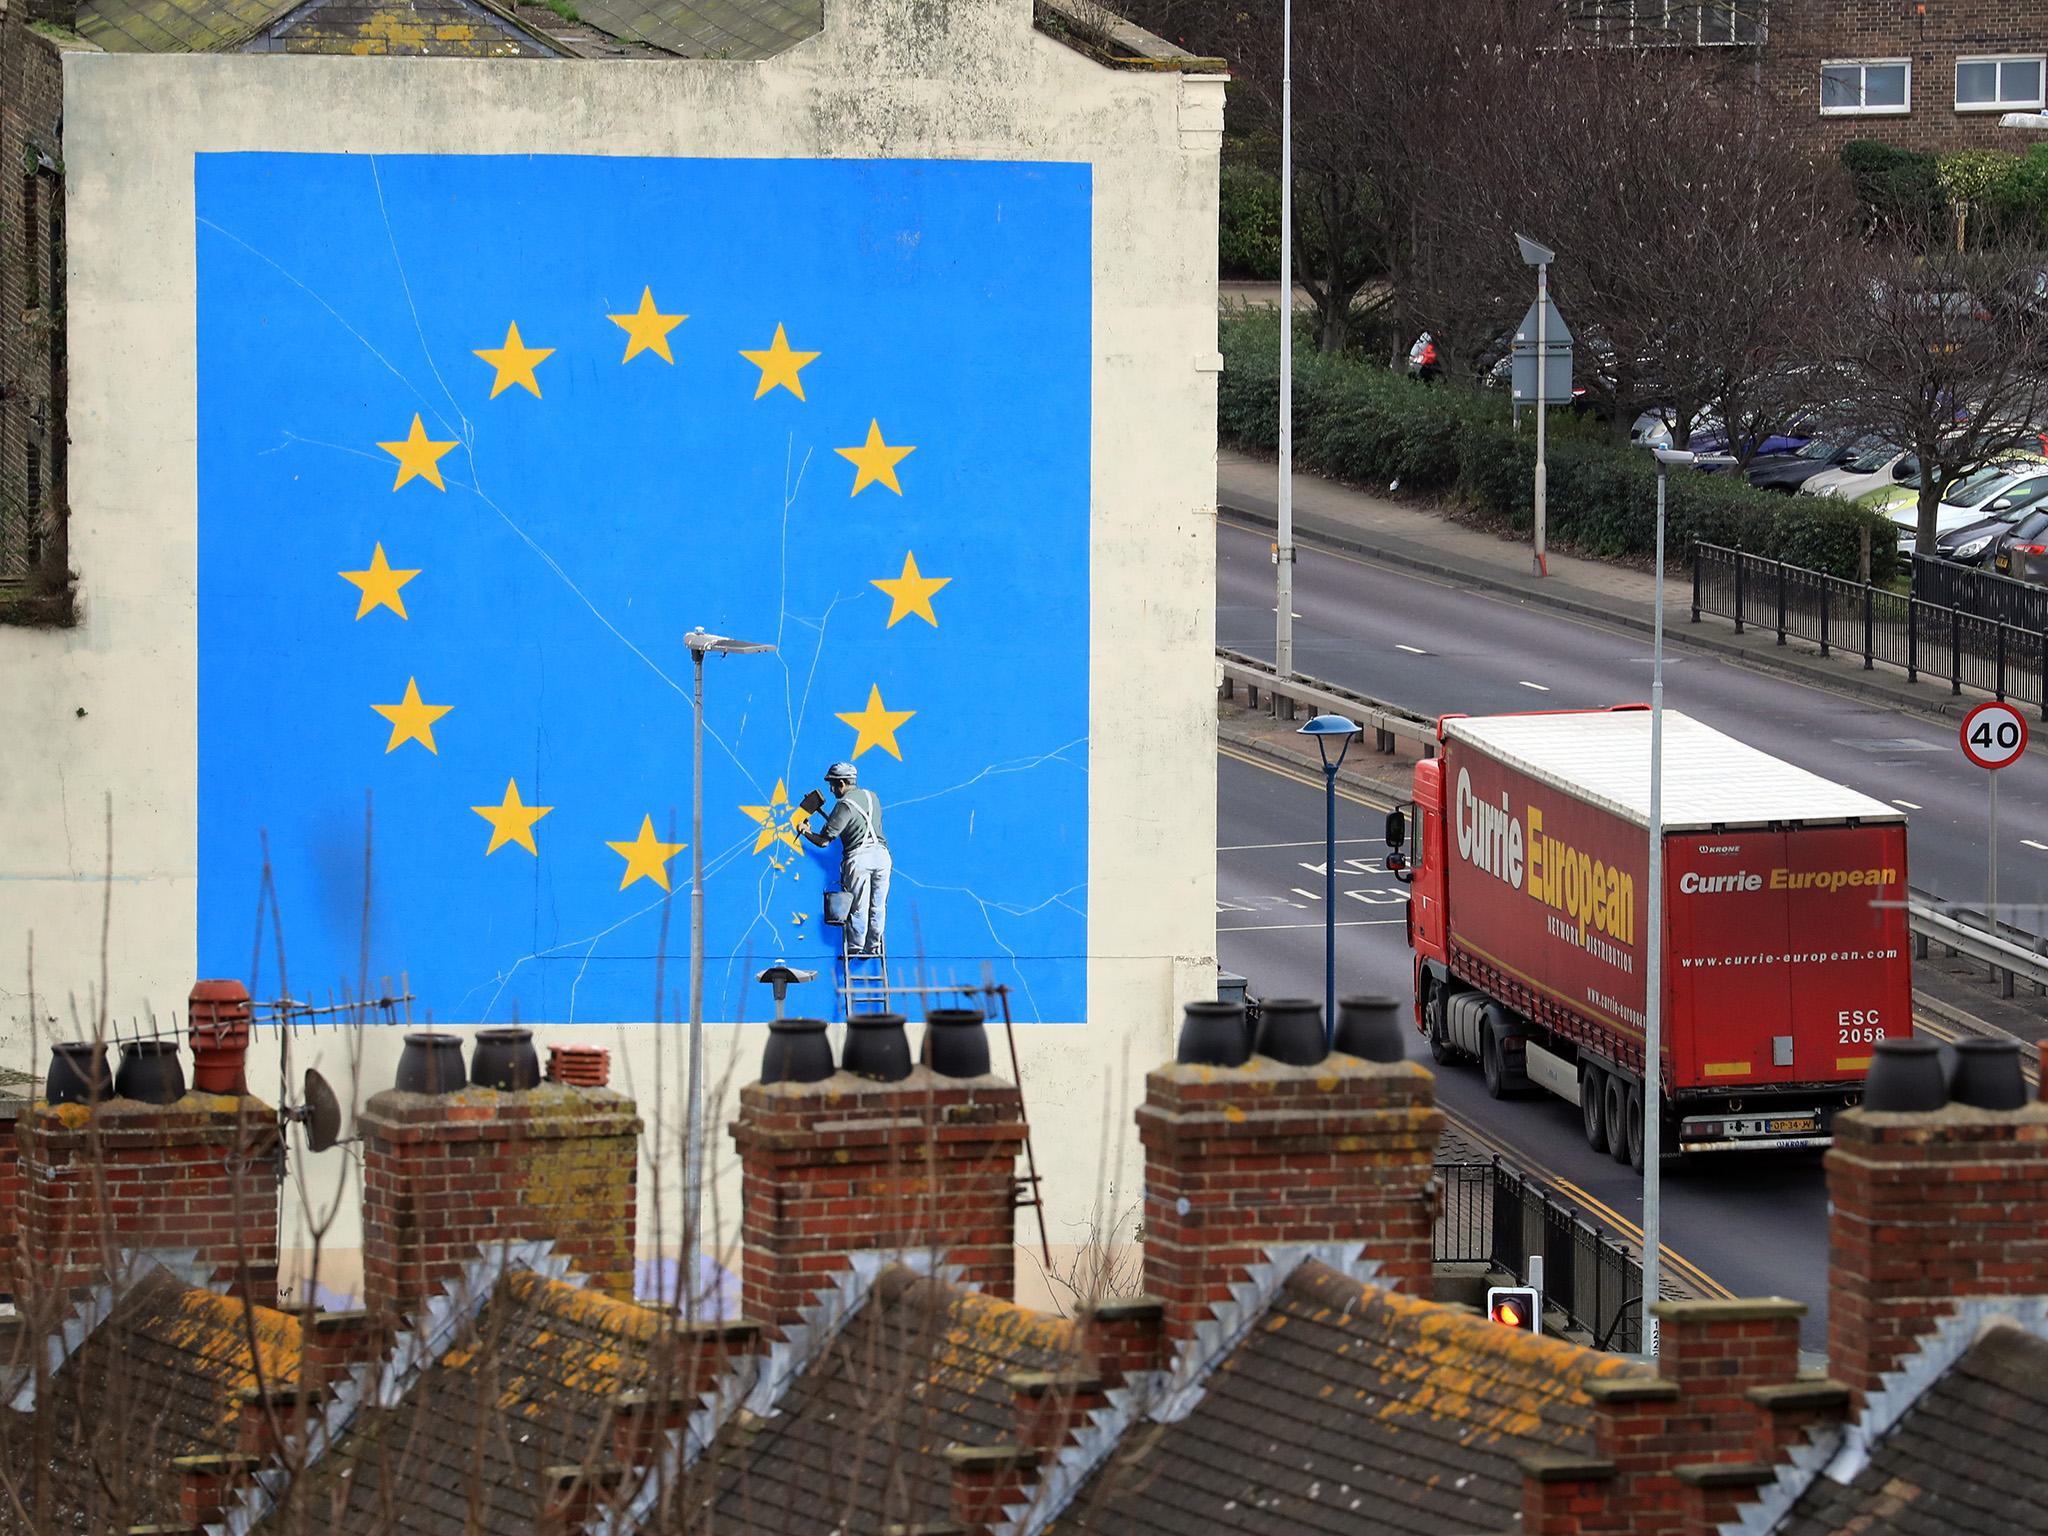 Is Dover bothered by Brexit?